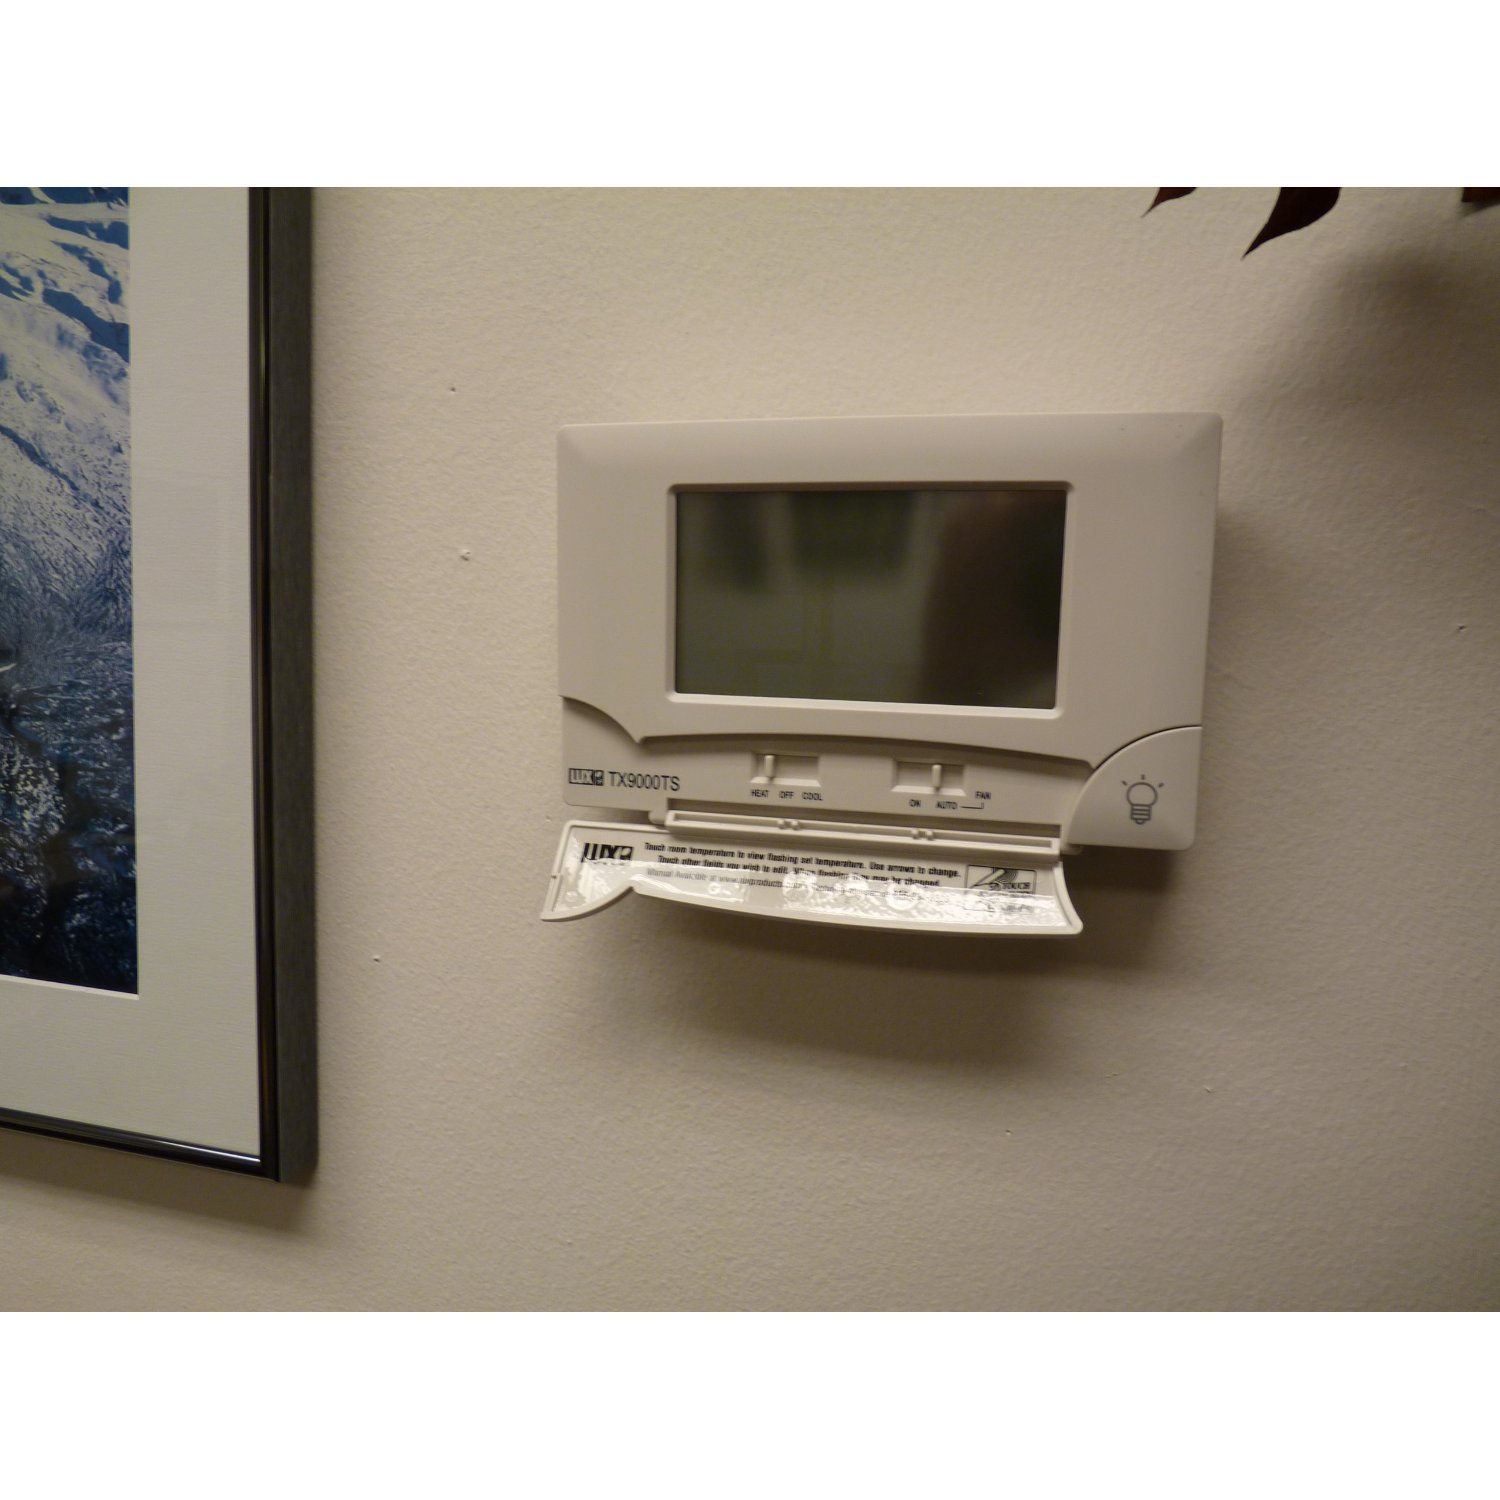 http://thetechjournal.com/wp-content/uploads/images/1202/1329391308-lux-tx9000ts-touch-screen-sevenday-programmable-thermostat-4.jpg